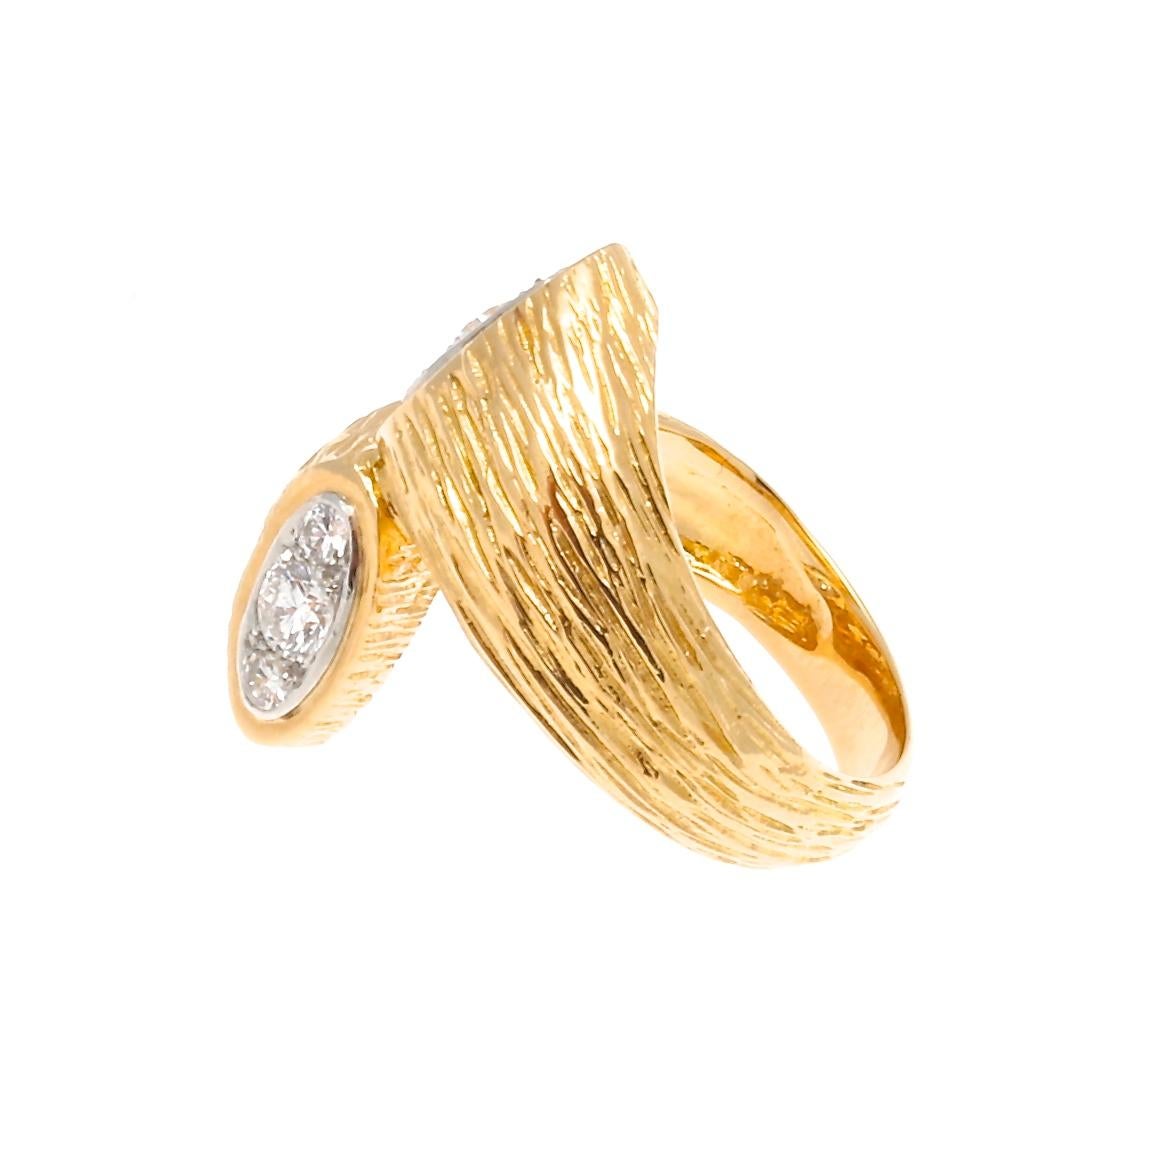 One of Boucheron's goals is to symbolically animate the inanimate. They have this by emphasizing the goldsmith work in their masonry. Featuring a textured 18k gold gold bypass ring ending in two diamond heads creating this motif. Signed Boucheron